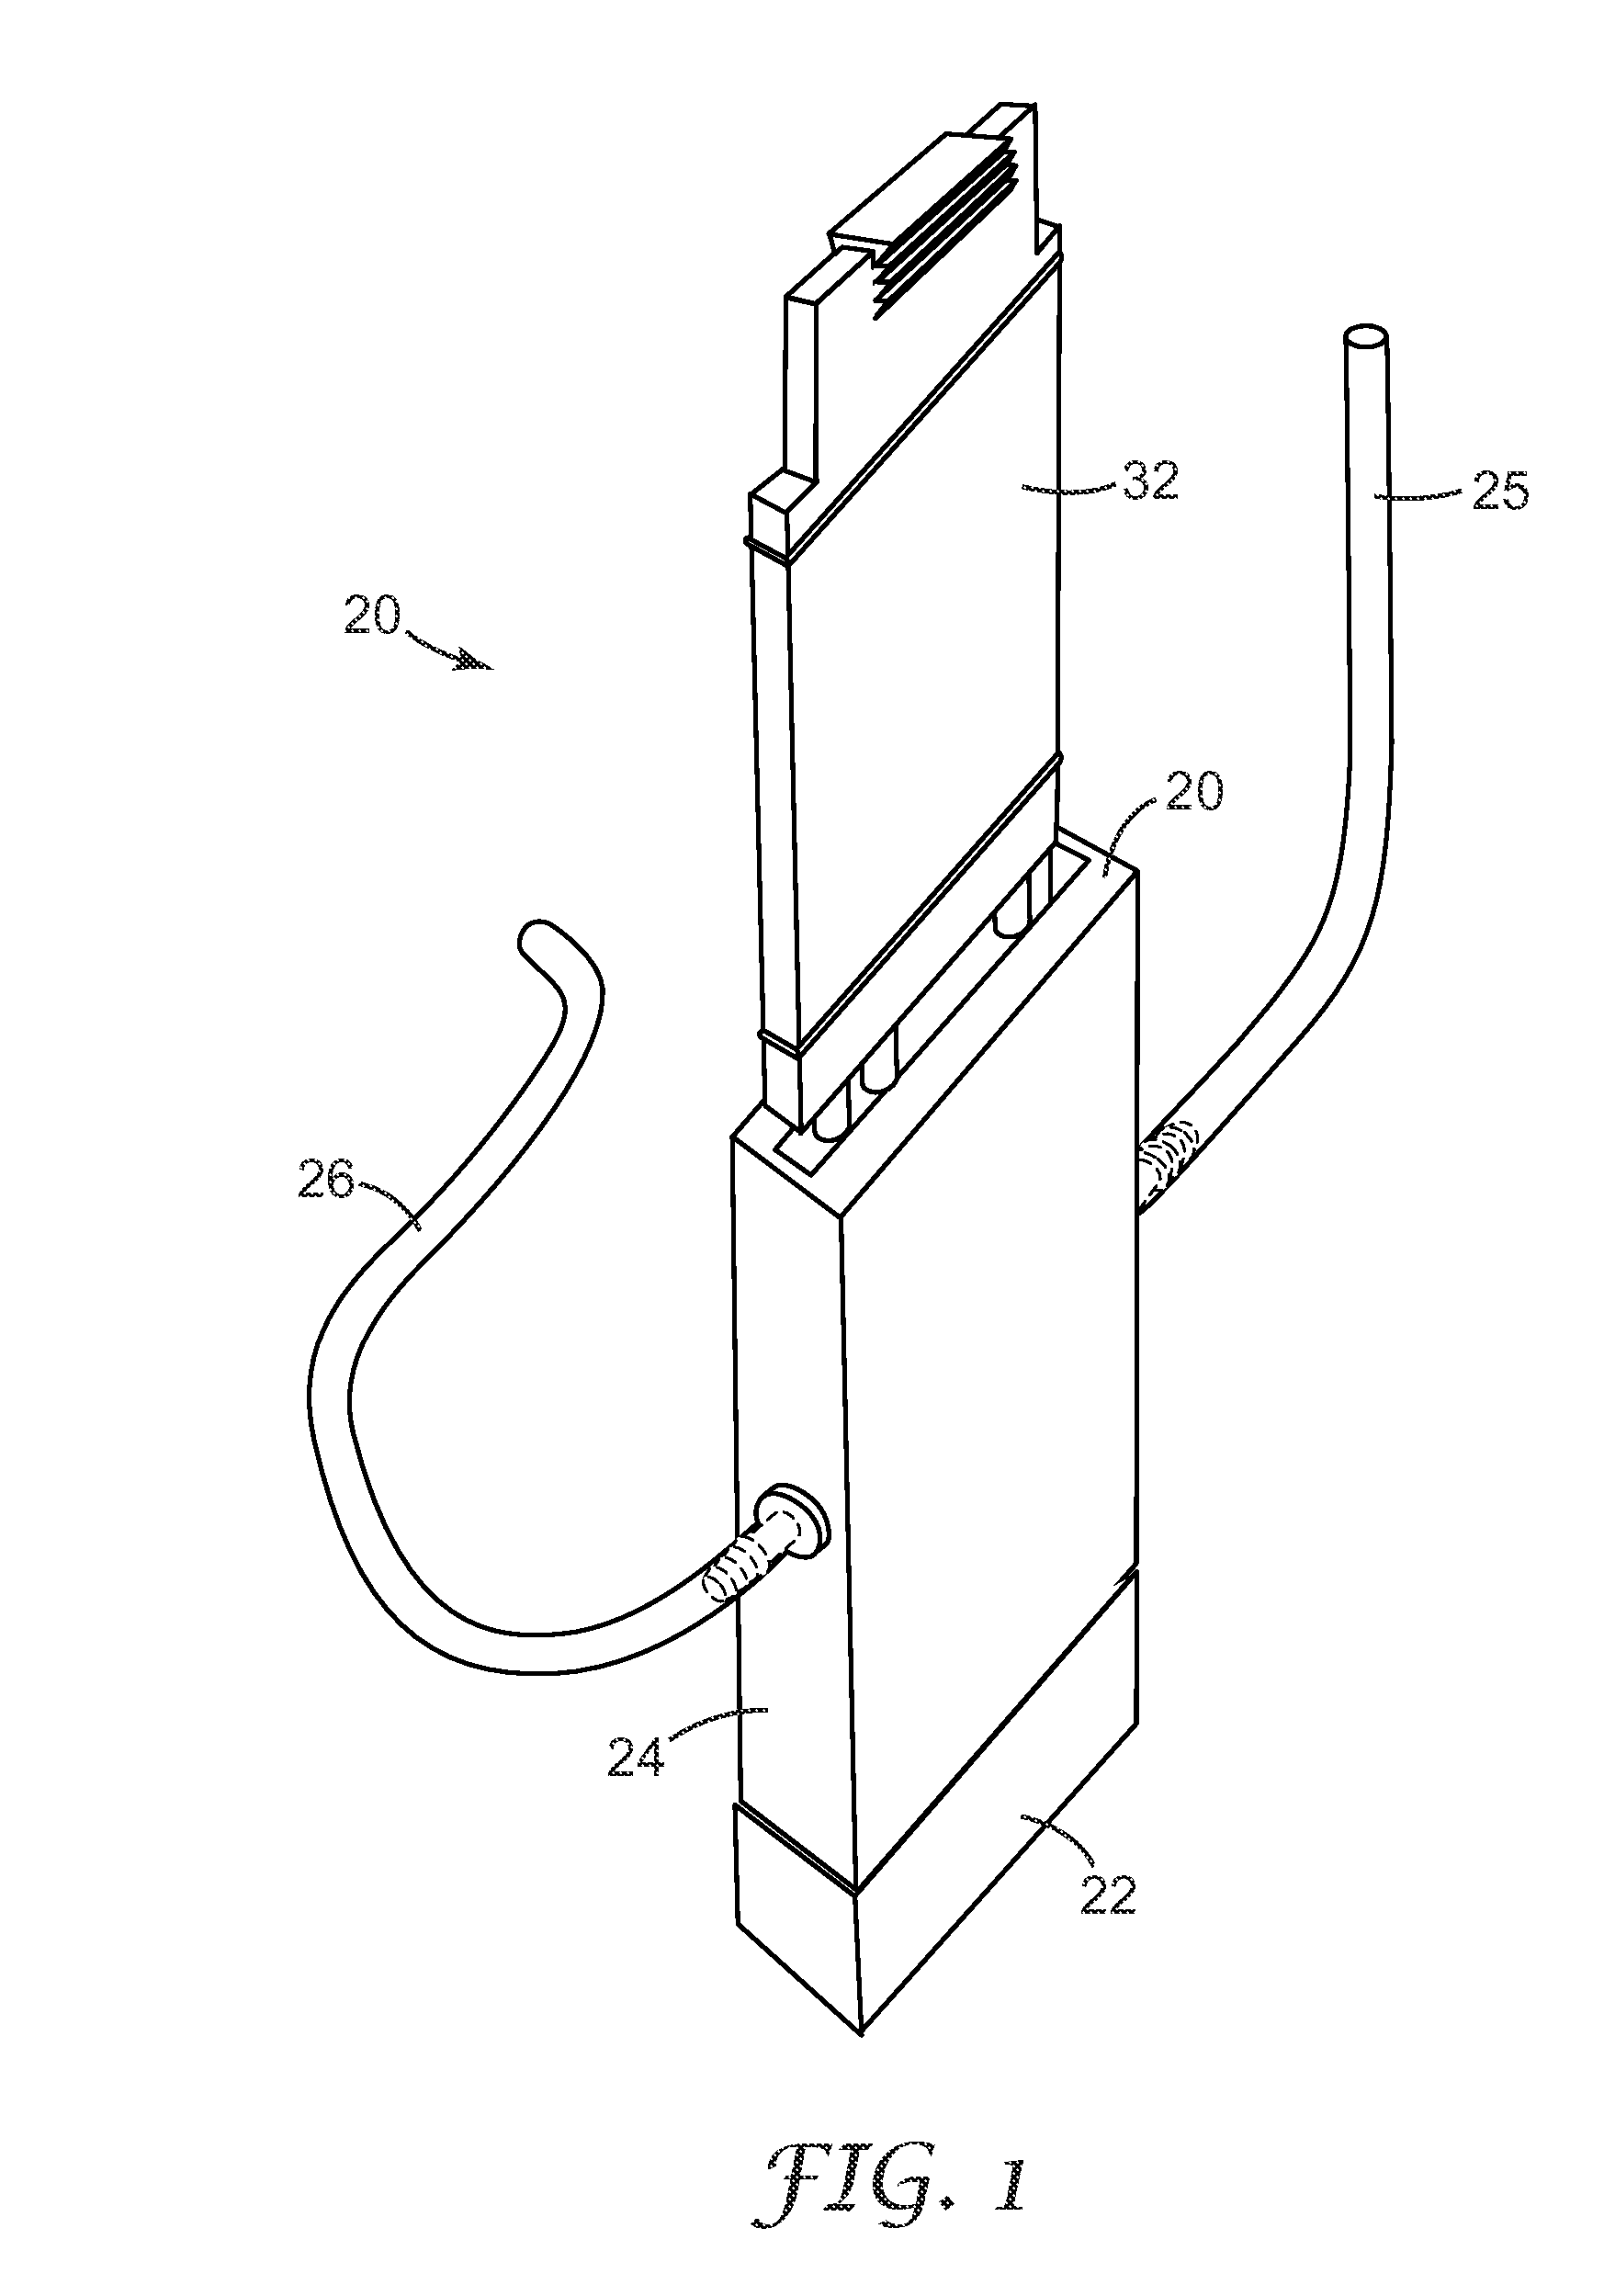 Systems and methods of dispensing individual servings of flavored and enhanced water